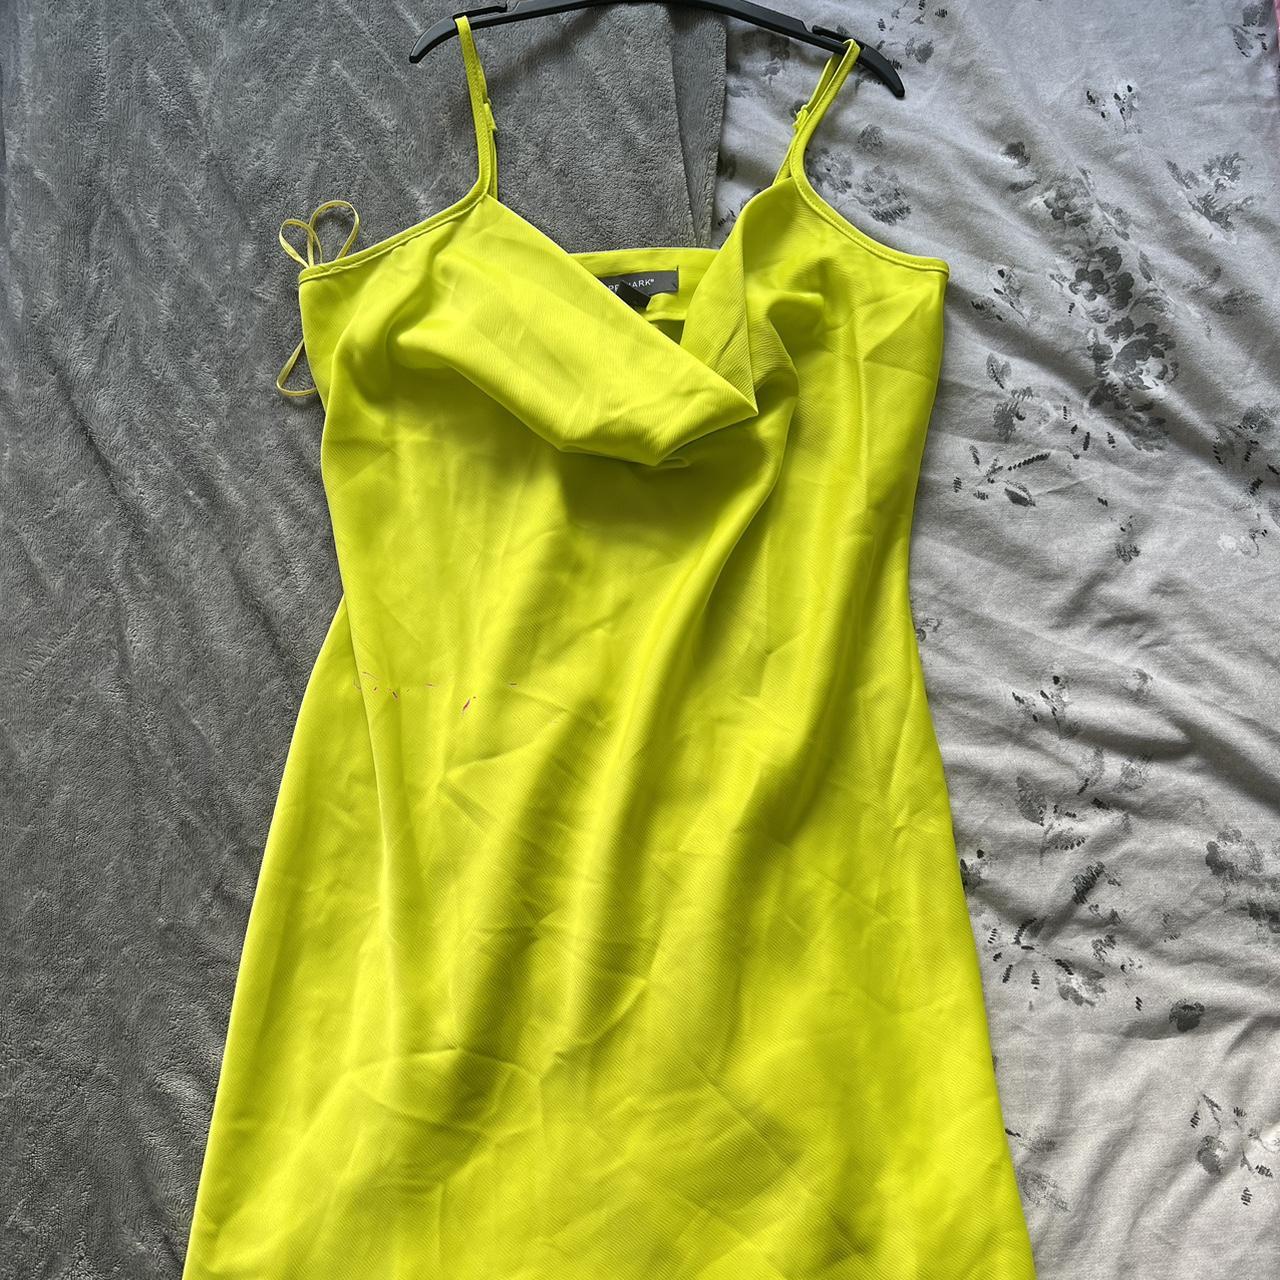 Primark stain dress Worn once For reference the... - Depop